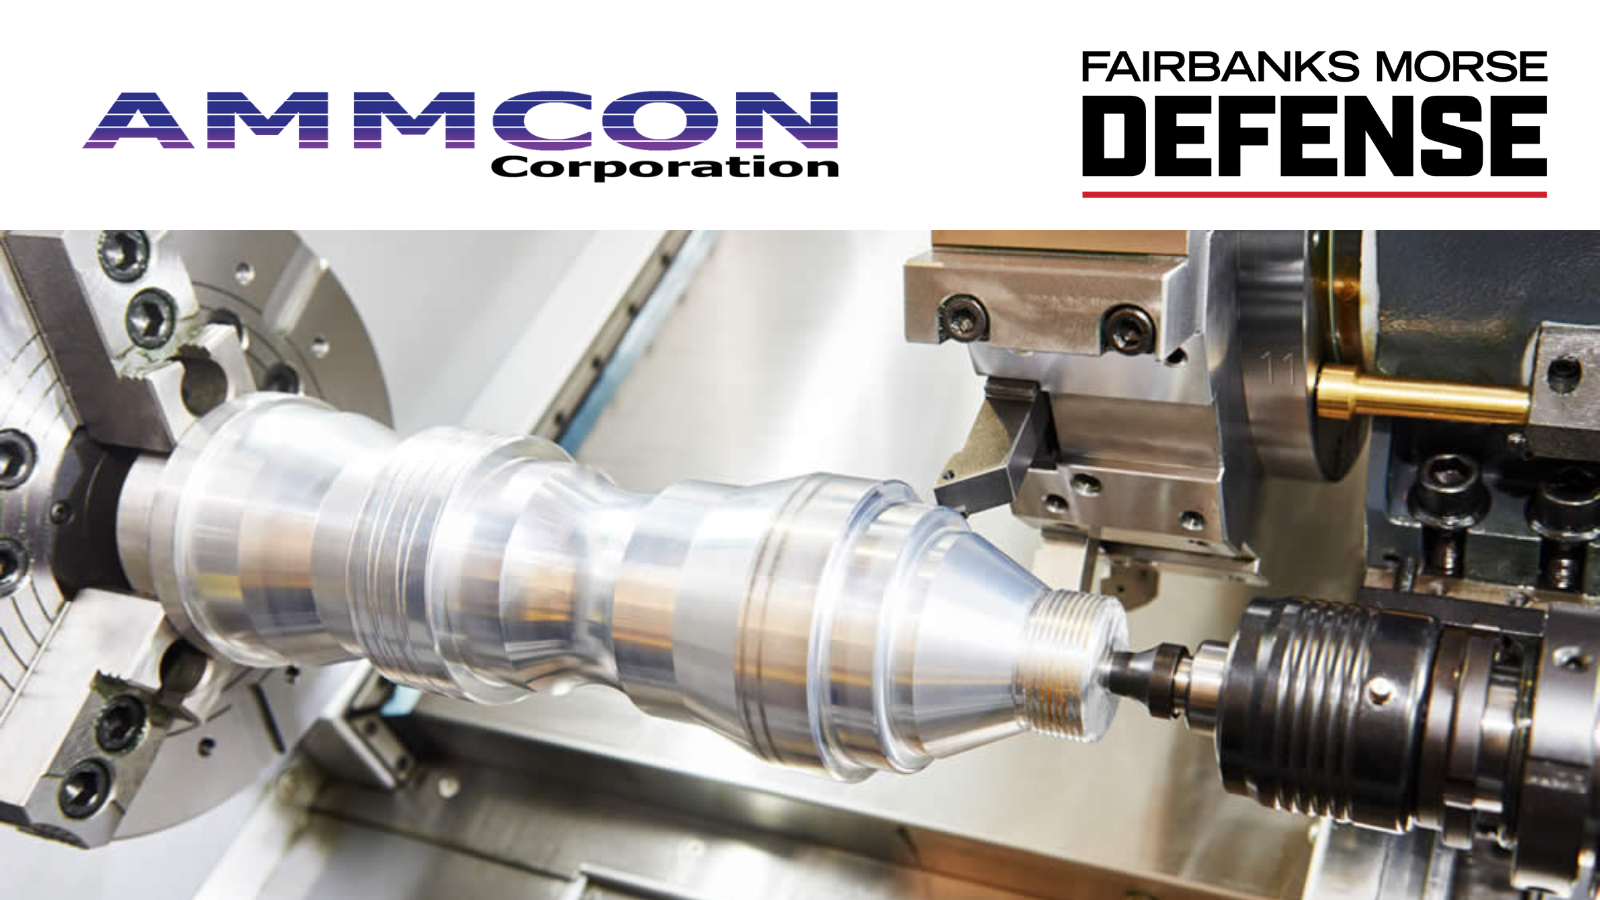 Fairbanks Morse Defense Continues Expanding Turnkey Solutions with AMMCON Acquisition